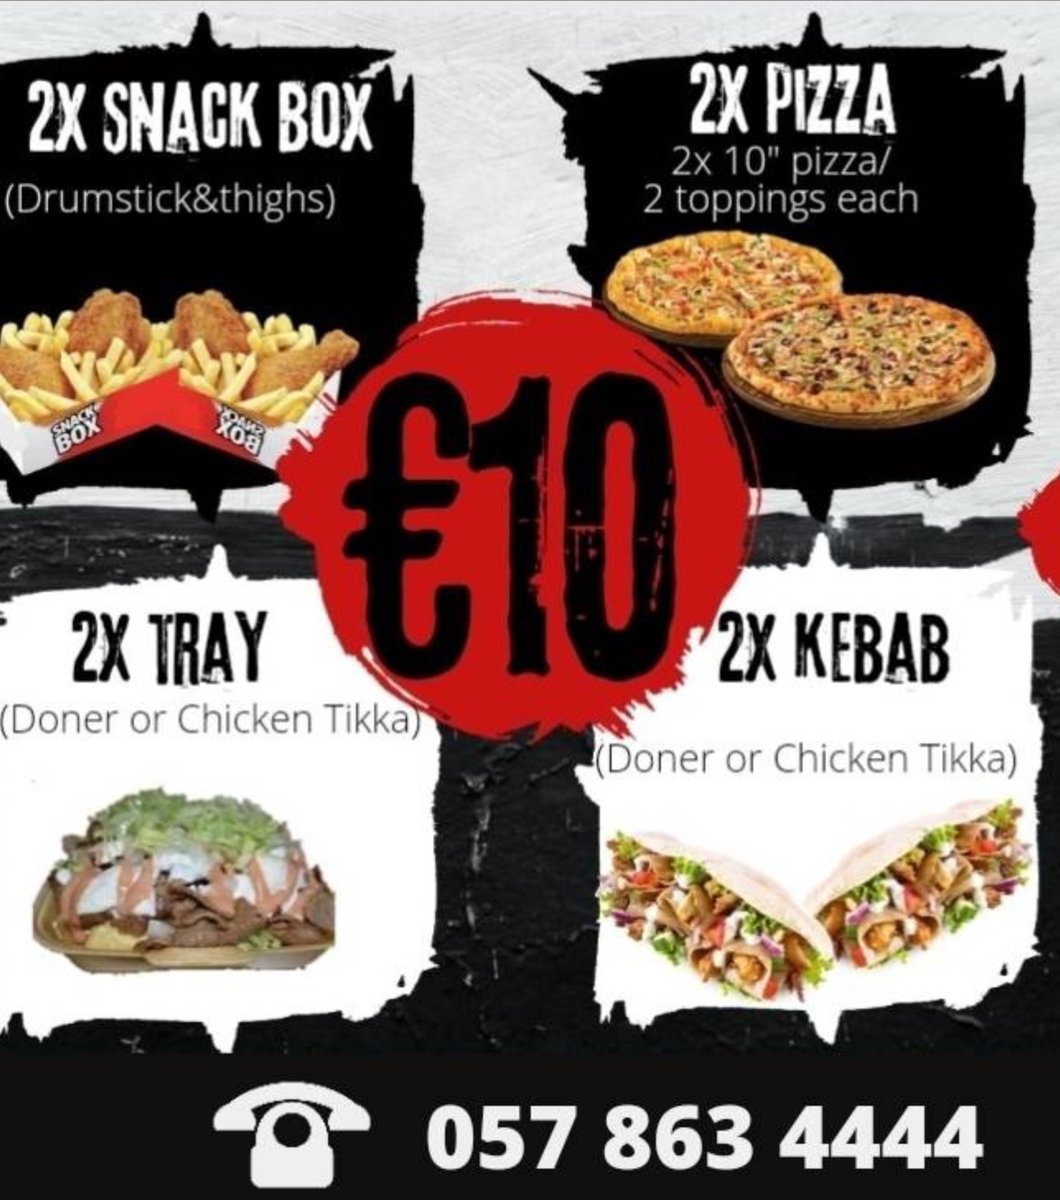 Best Choice pizza&kebab 
This week is last chance to get our #mixandmatch ☎️057 863 4444
This is a #sponsored post, supporting business in our community 💕